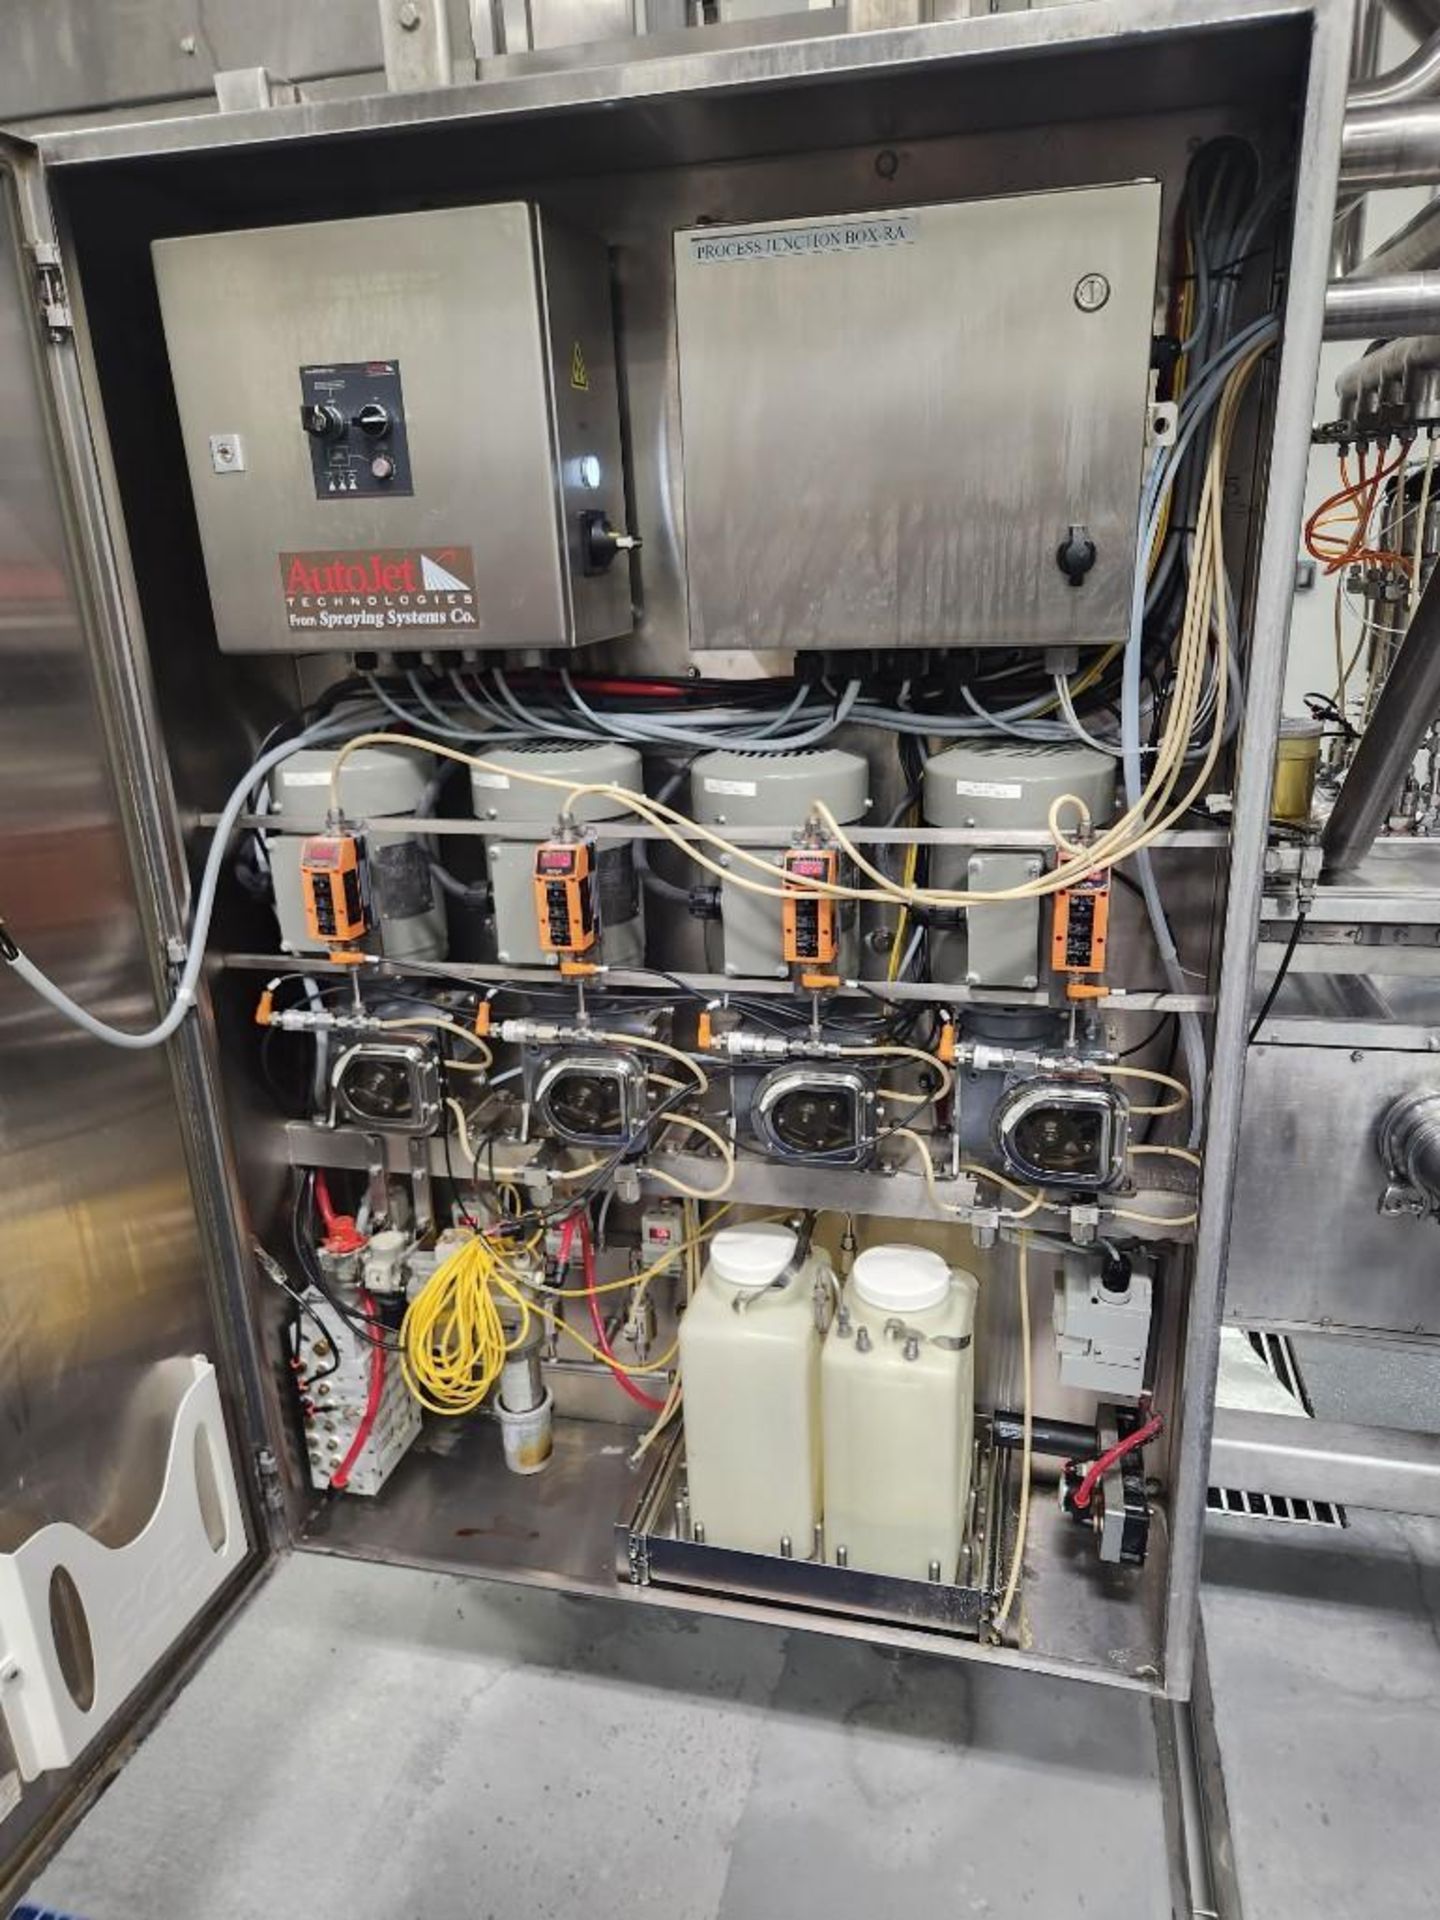 Modern Packaging S/S Online 4-Lane Cup Filler, Model: MP-811 with Sterilizer, HEPA Air System - Image 6 of 6